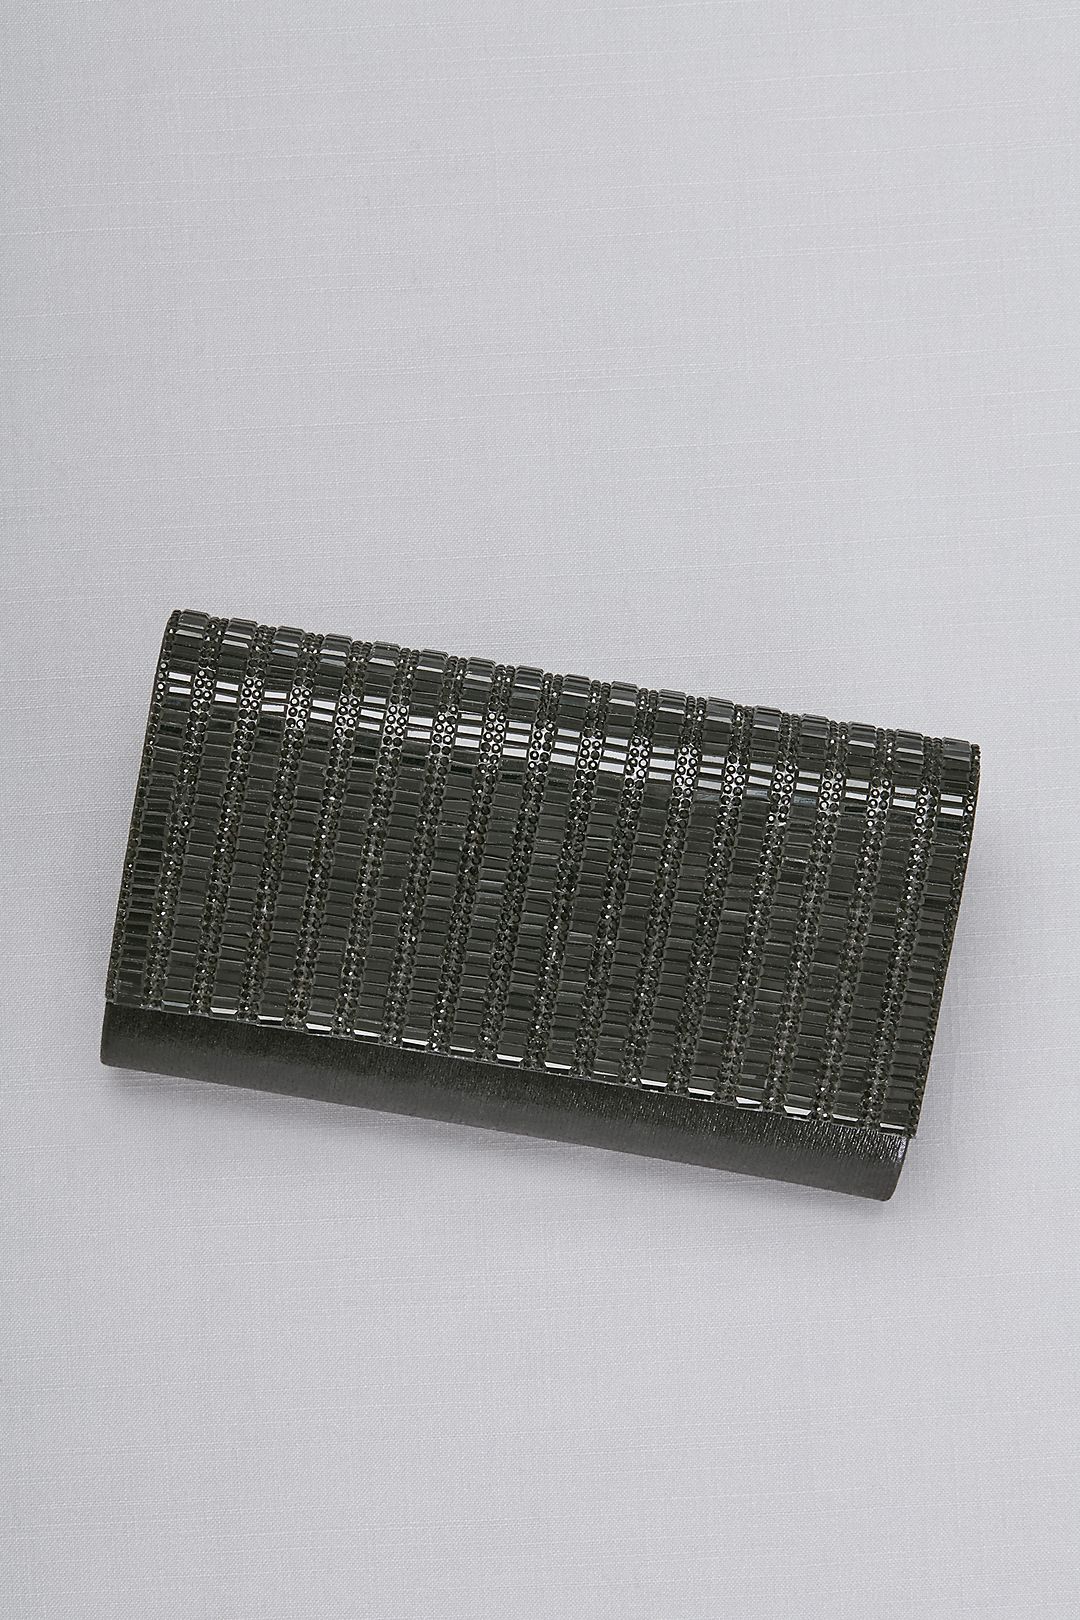 Pave and Baguette Rows Clutch Image 4